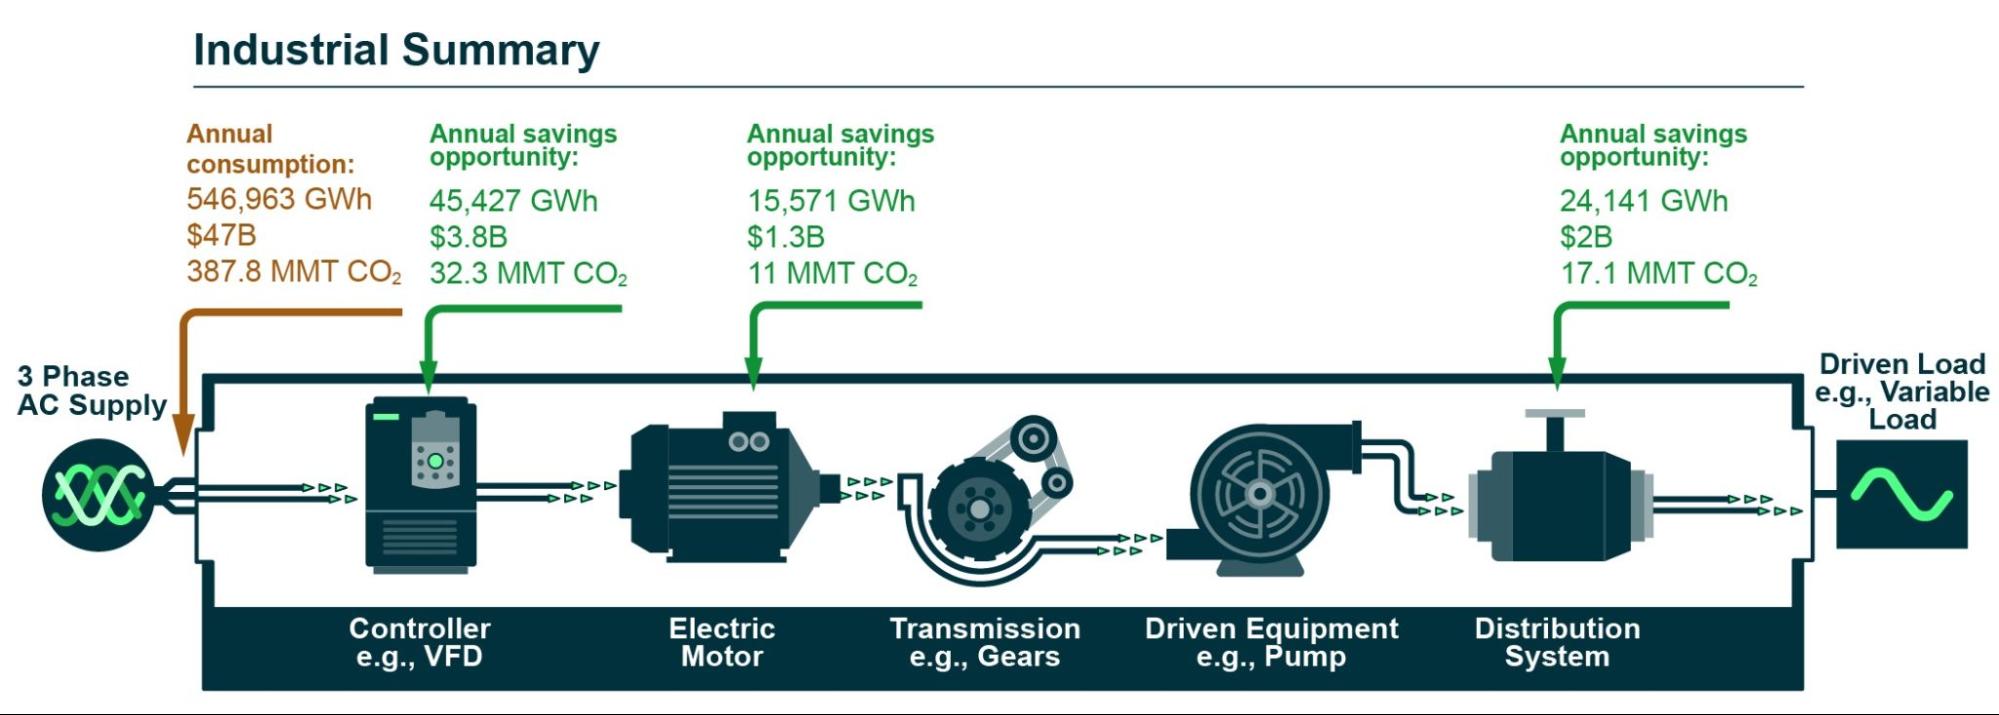 The illustration depicts the efficiency potential across the chain of components in an industrial motor system, from drive to the motor to the motor-driven equipment (such as pumps, fans, etc.) and the distribution systems that receive the fluids and other materials driven by the system.